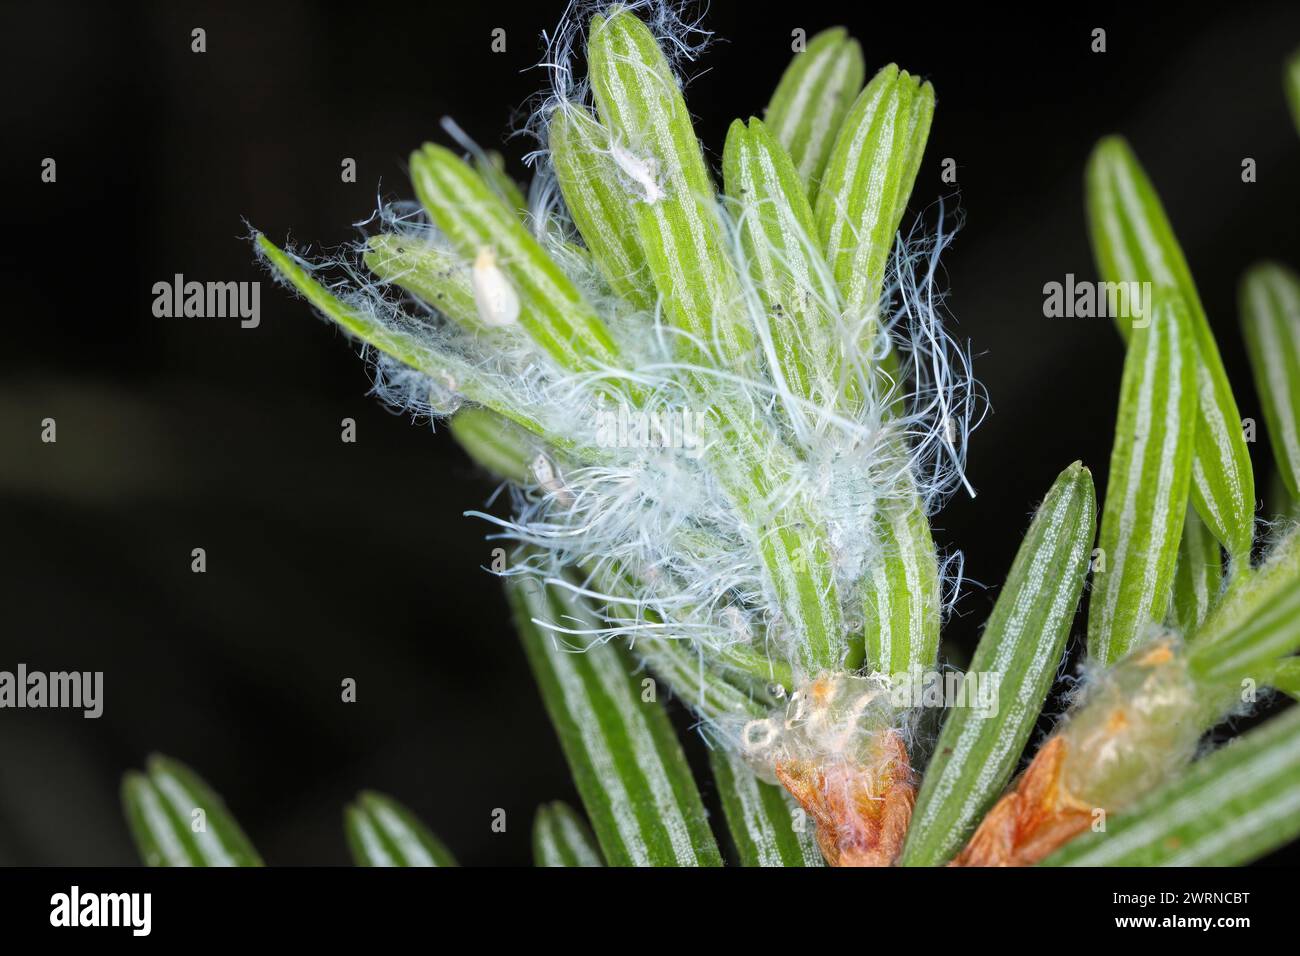 Balsam twig aphid or Silver fir aphids (Mindarus abietinus) feeding on cause damage twisted and curled needles on fir (Abies spp.) Stock Photo